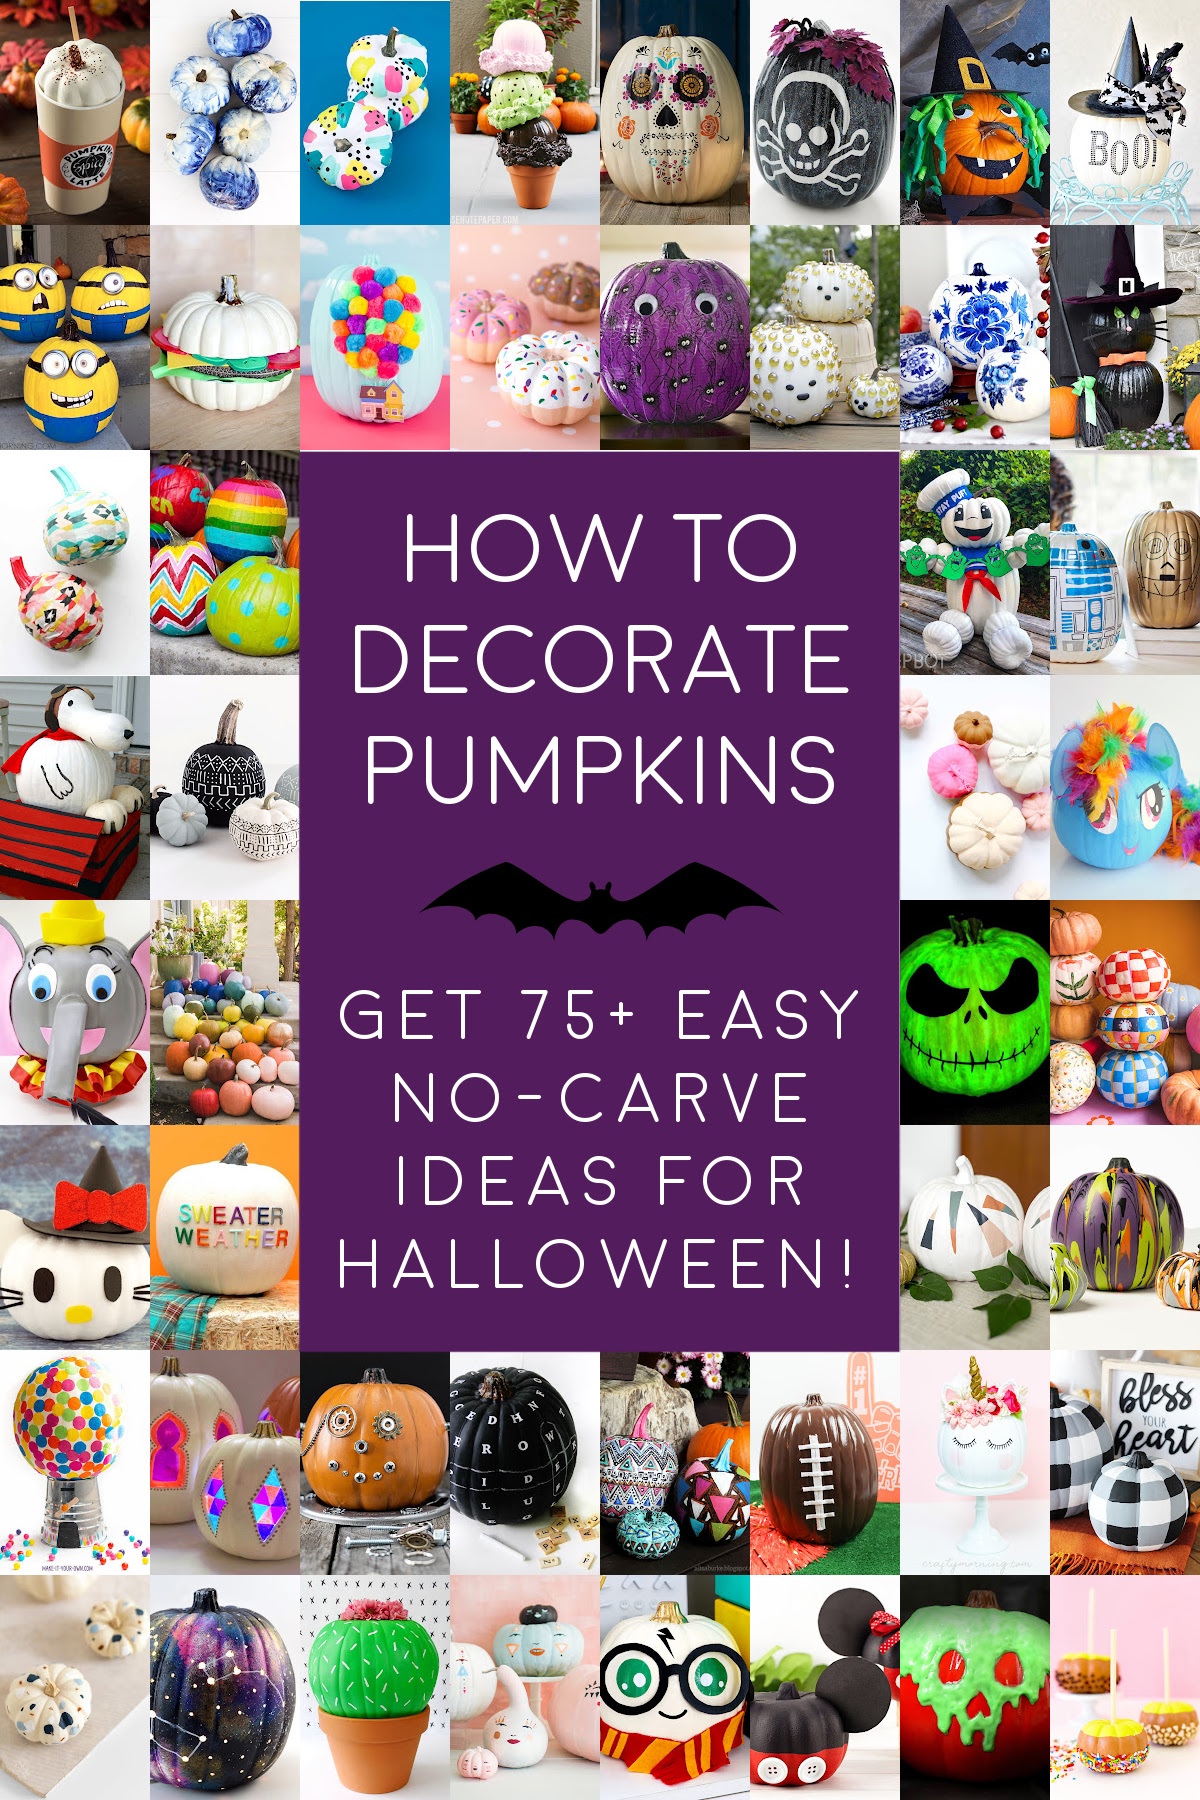 Decorating Pumpkins for Fall and Halloween